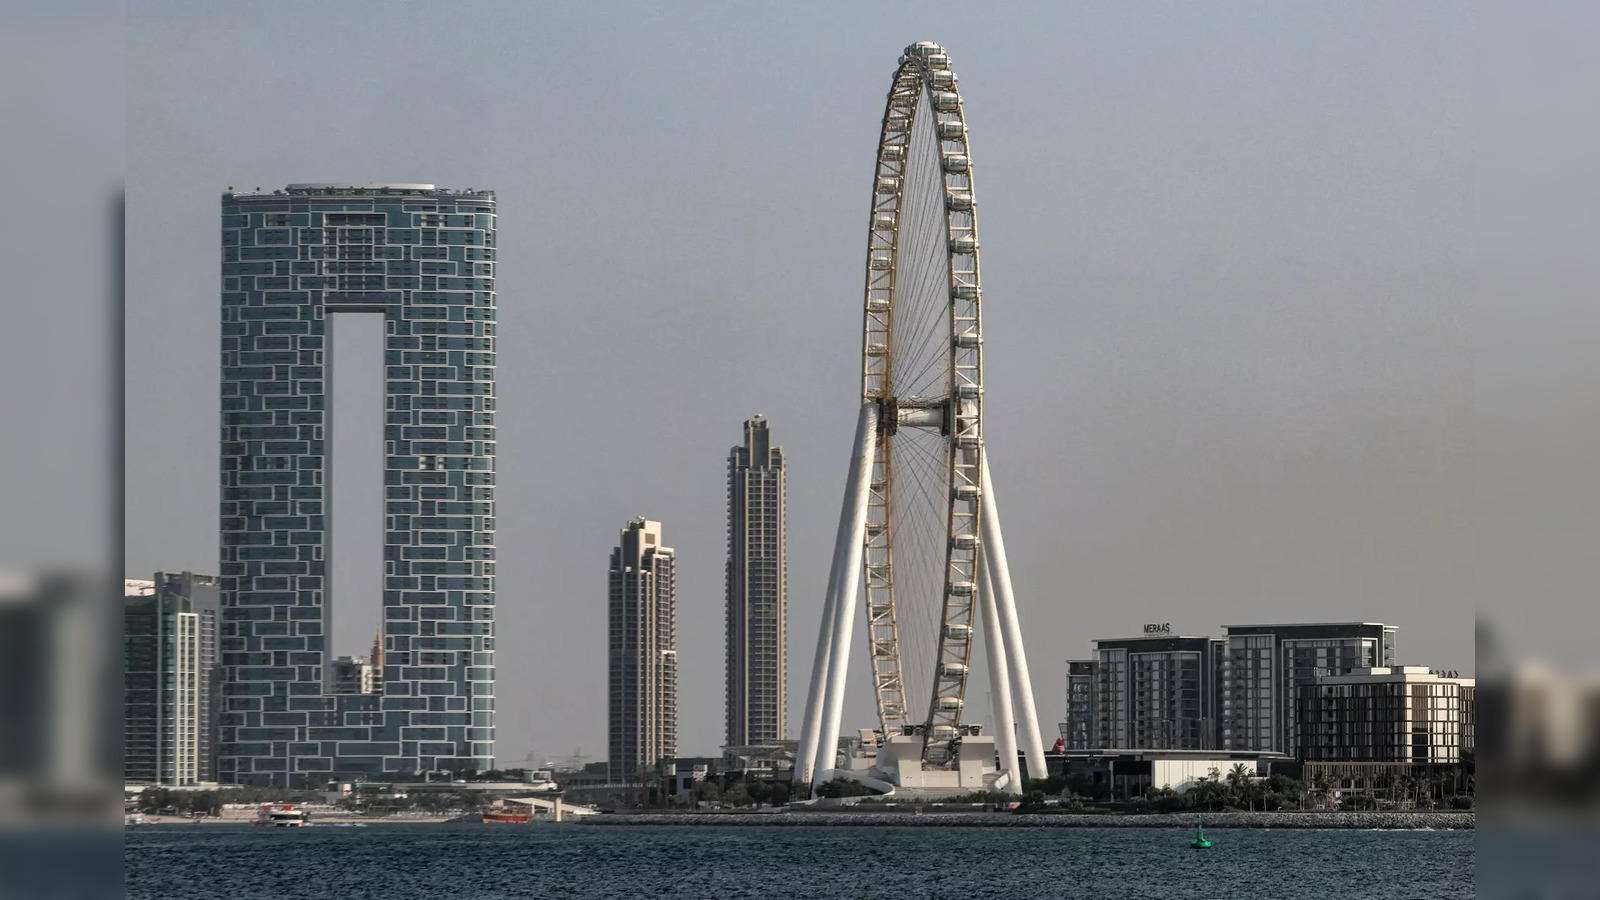 World's largest ferris wheel in Dubai has mysteriously stopped turning and  no one knows why